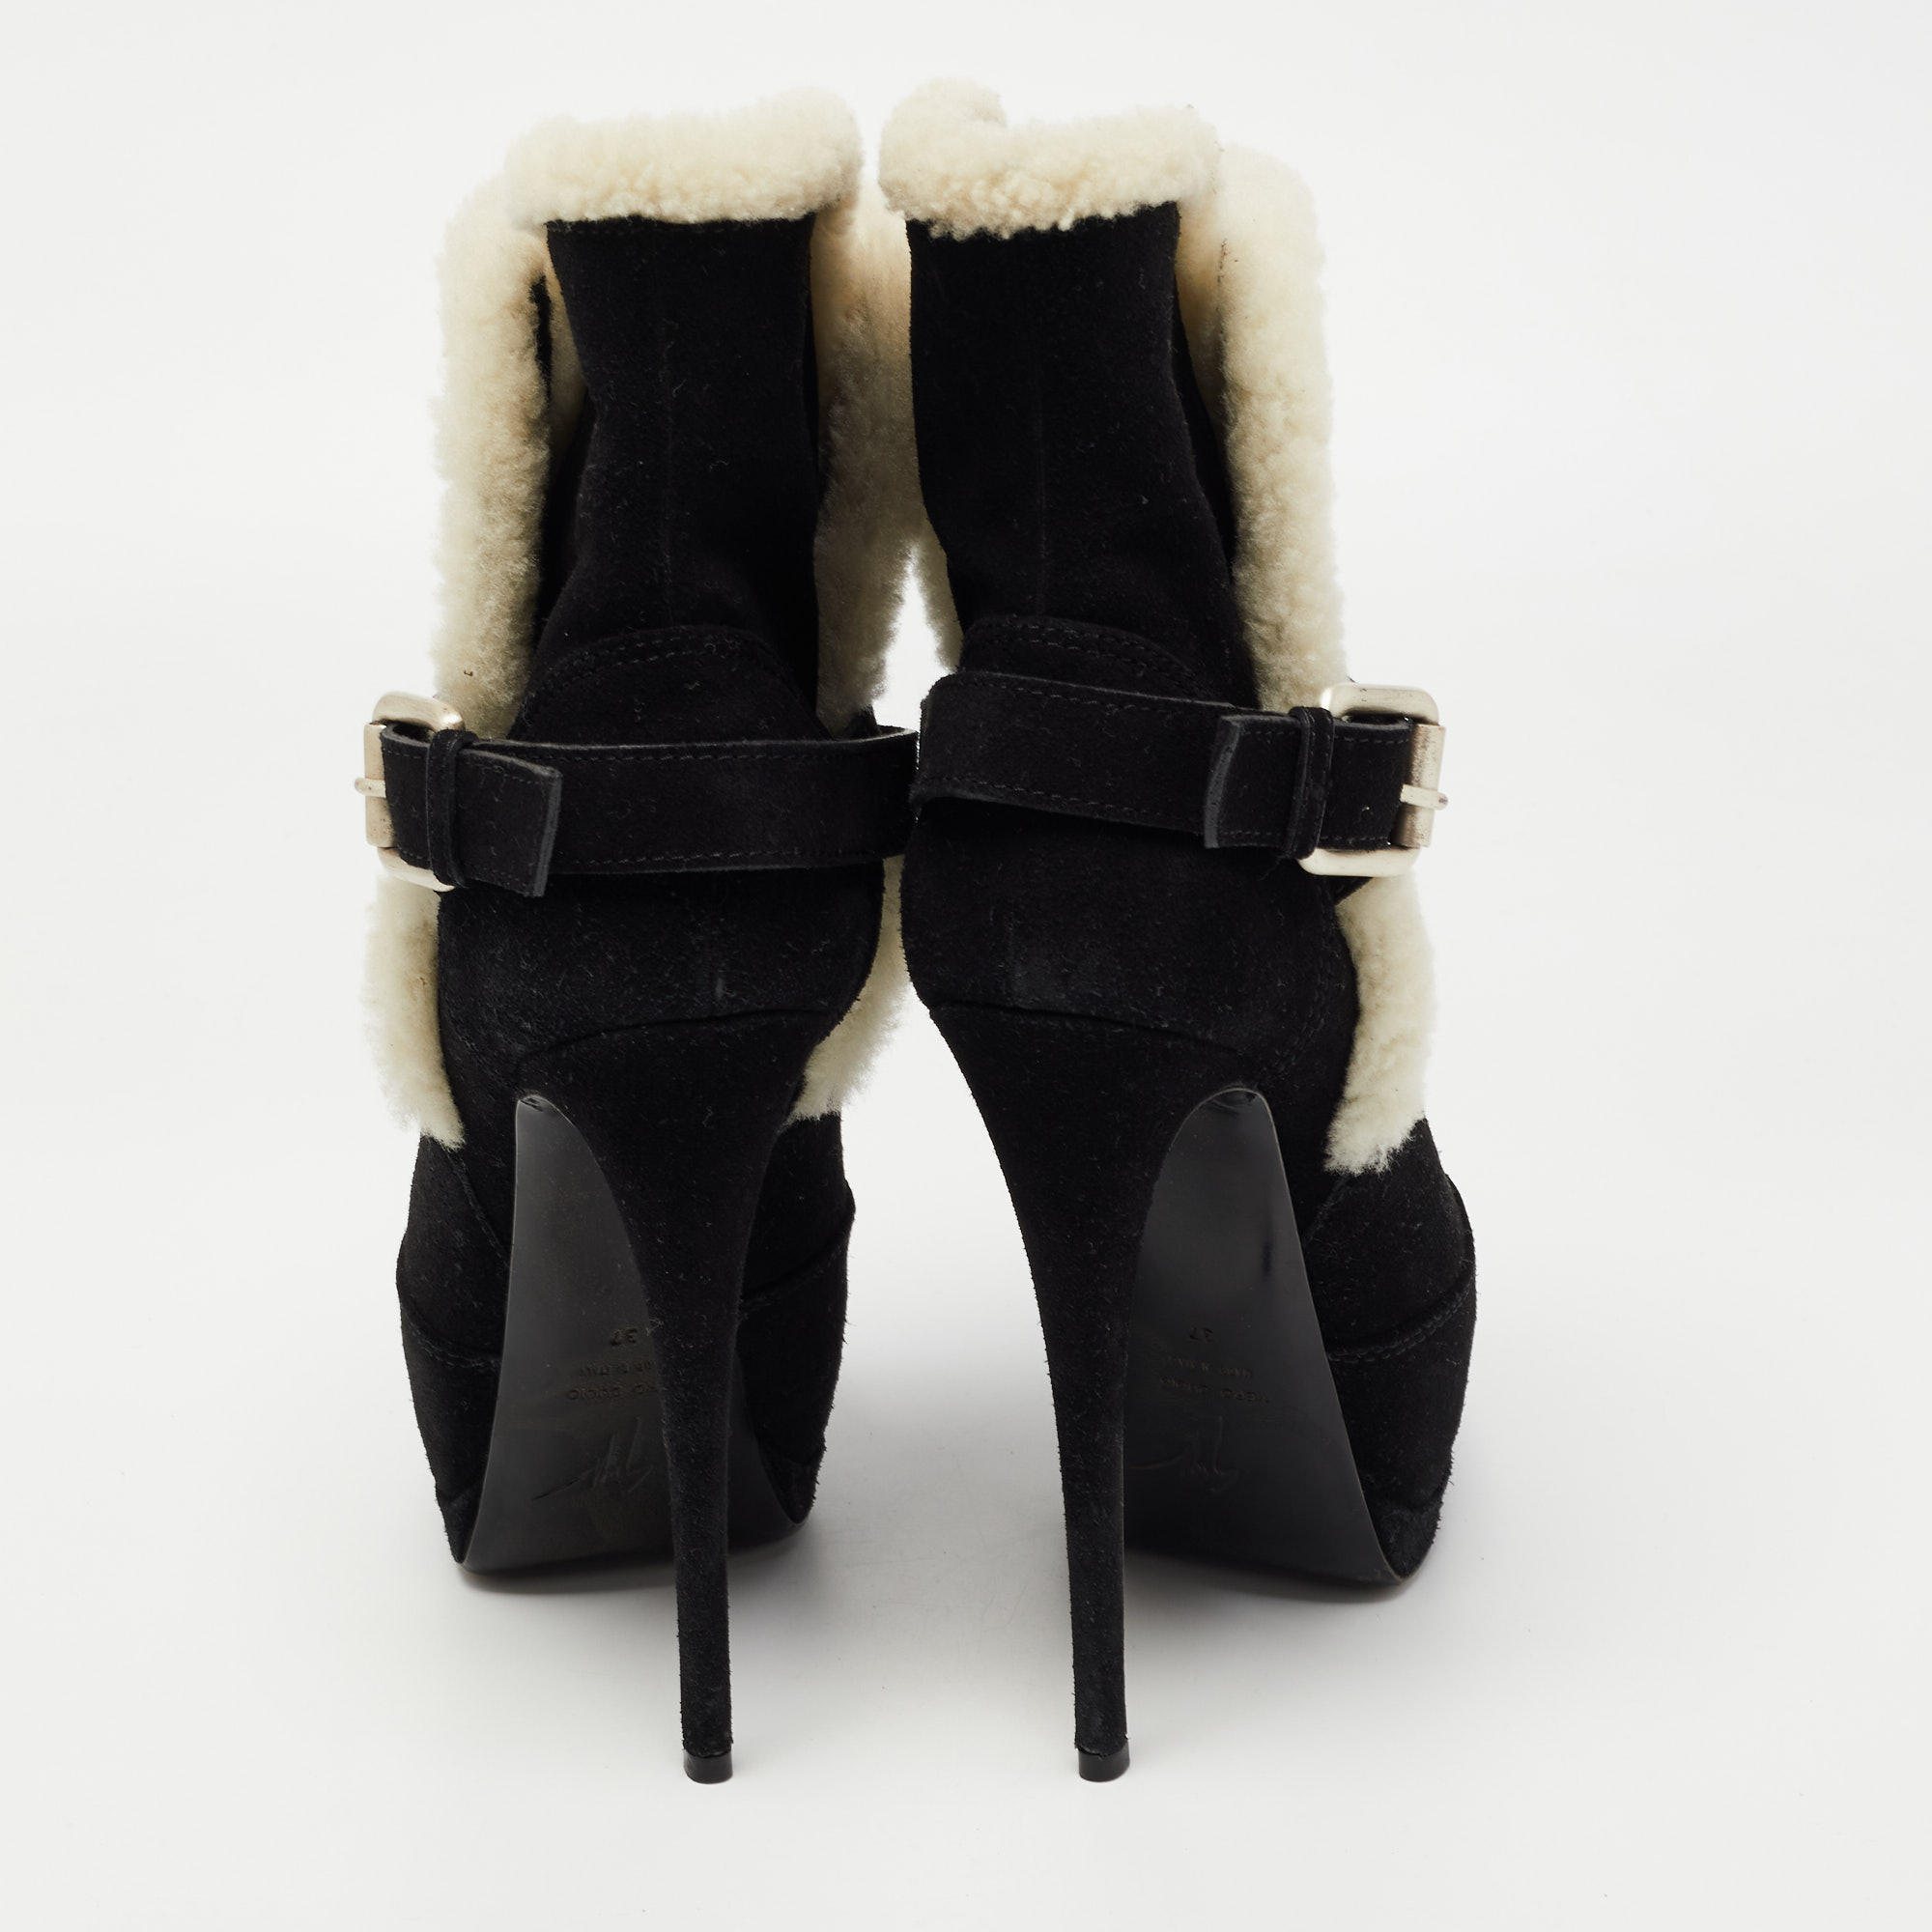 Giuseppe Zanotti Black Suede And Fur Ankle Boots Size 37